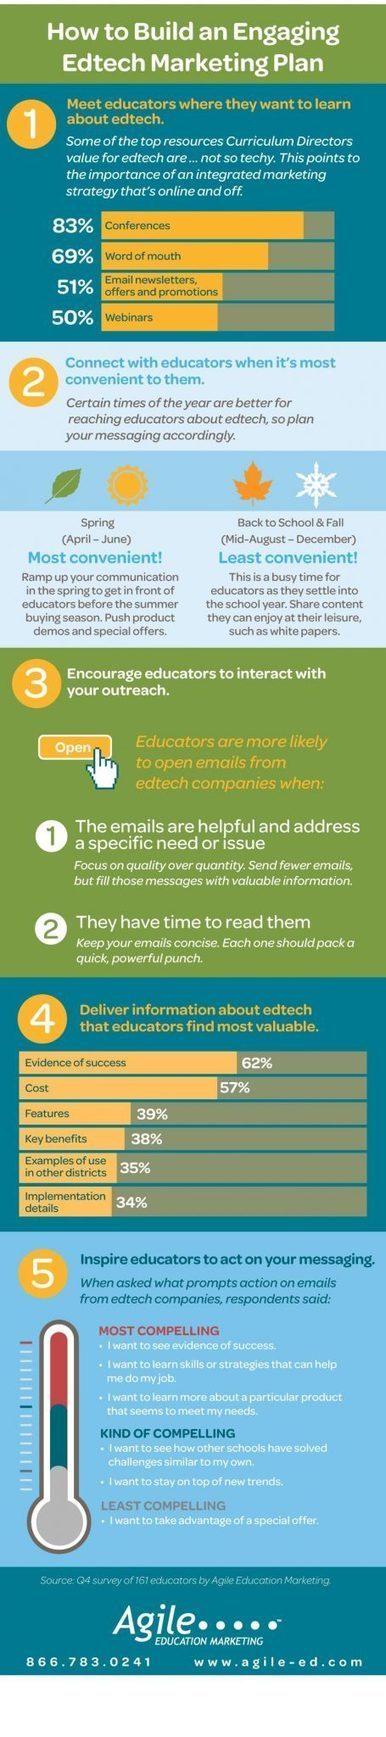 How to Build an Engaging Edtech Marketing Plan Infographic | Business Improvement and Social media | Scoop.it